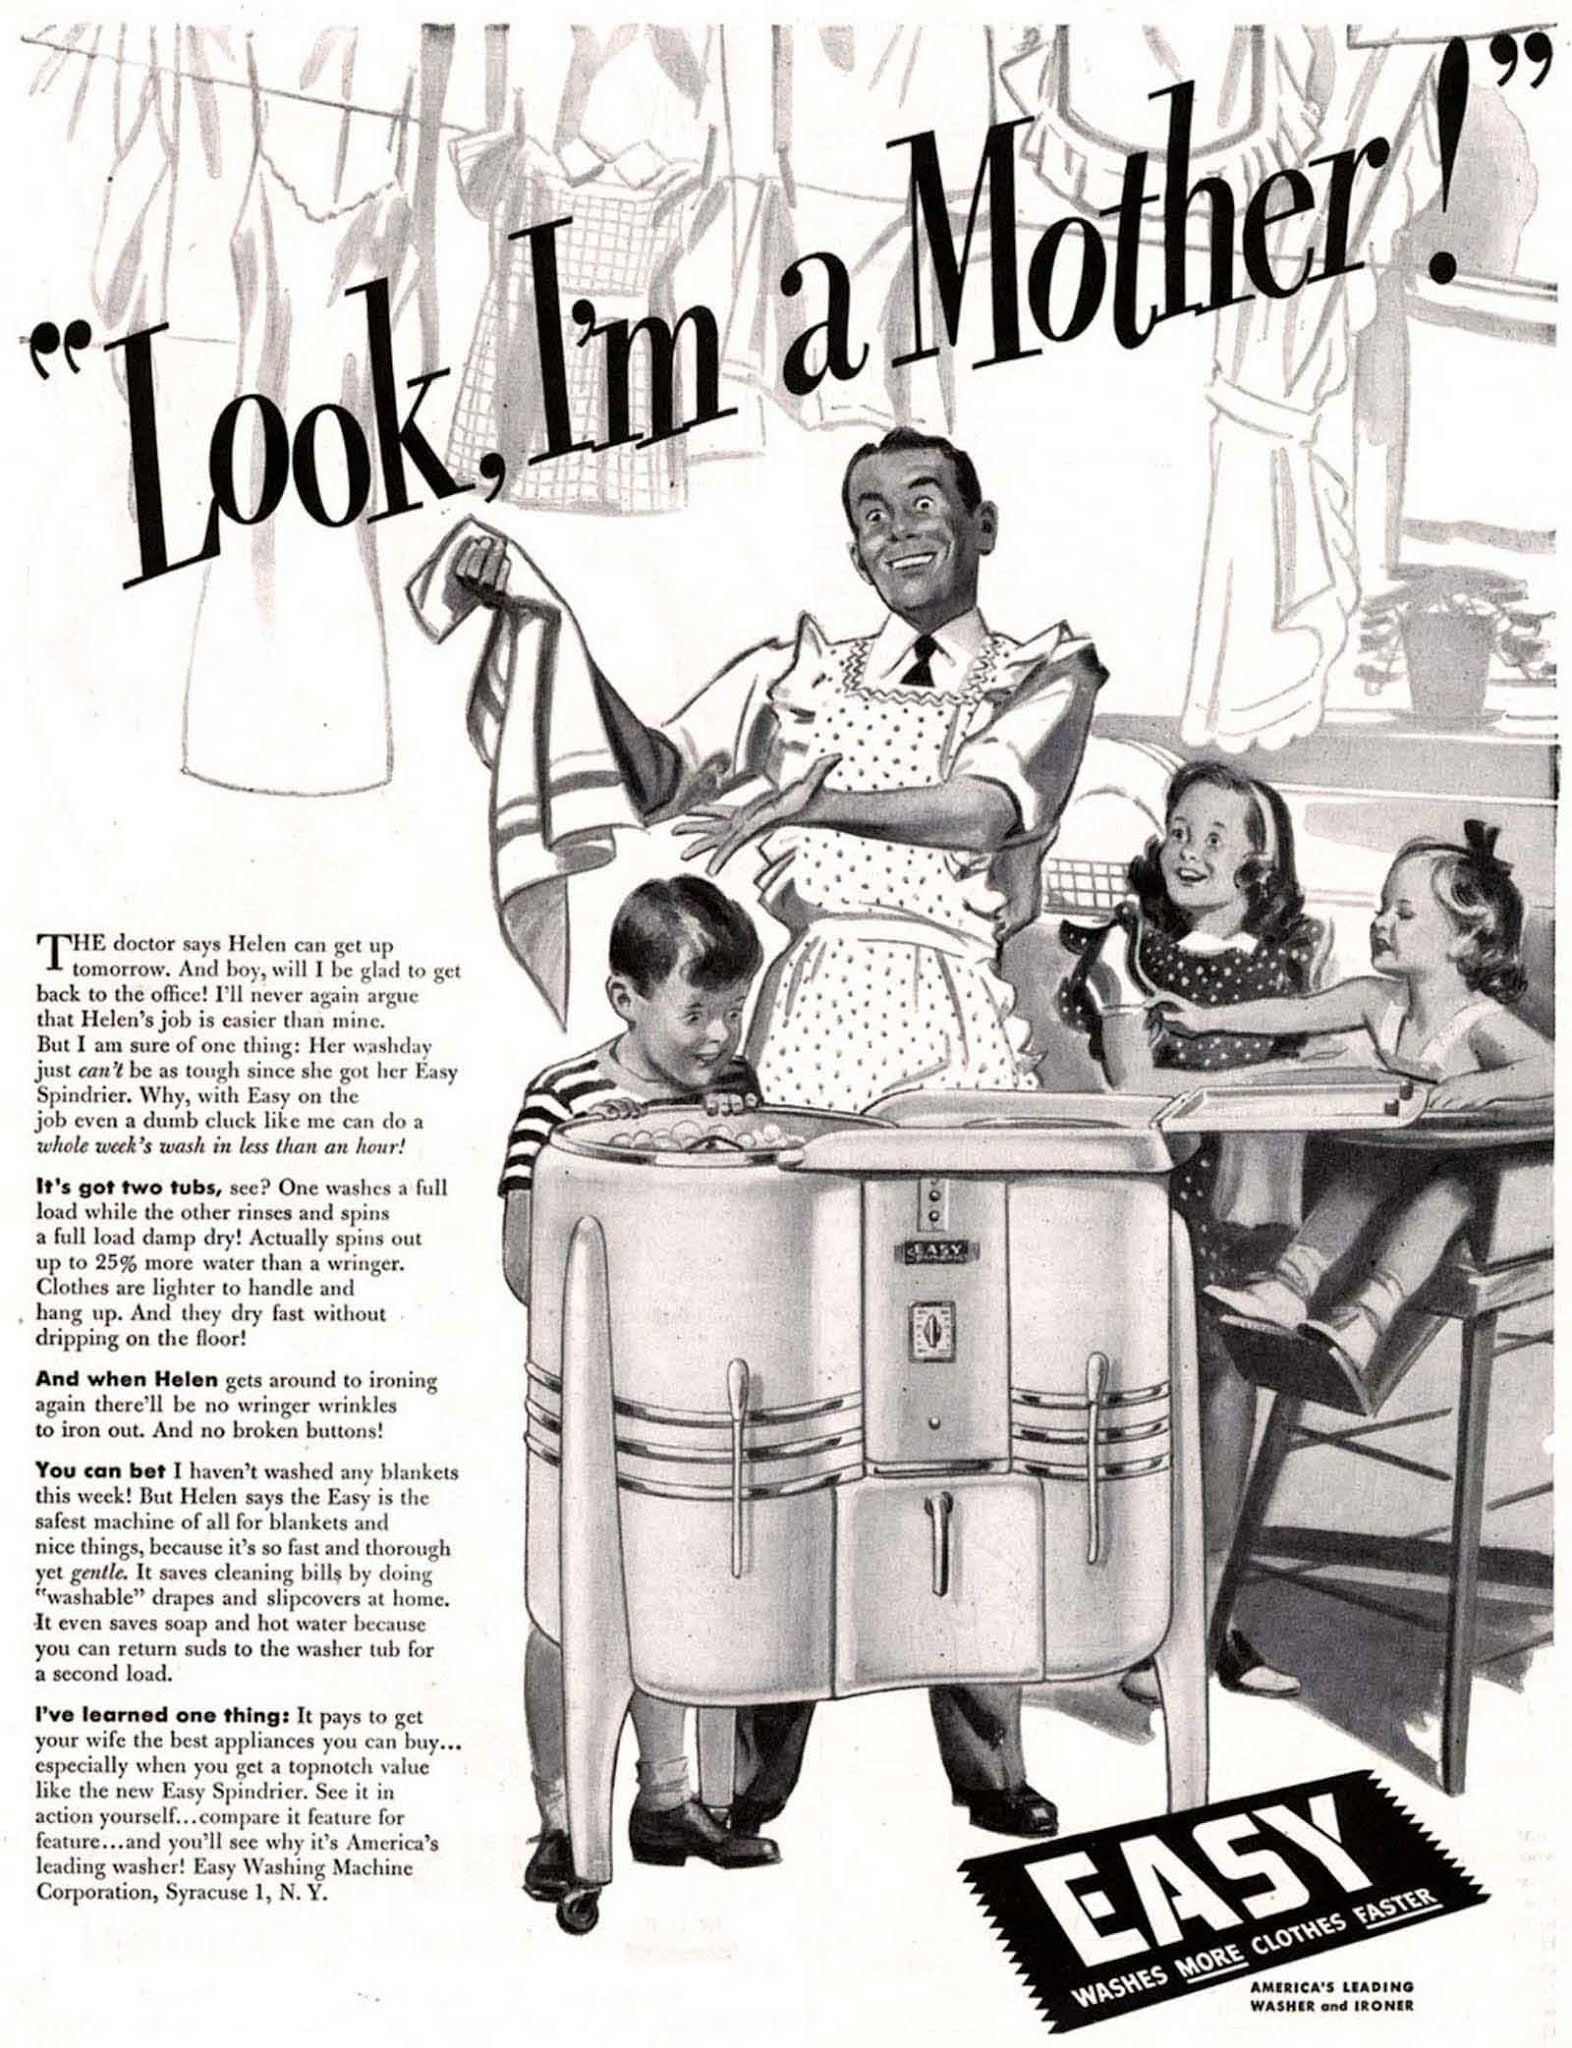 Look – I’m a mother!. 1940s.